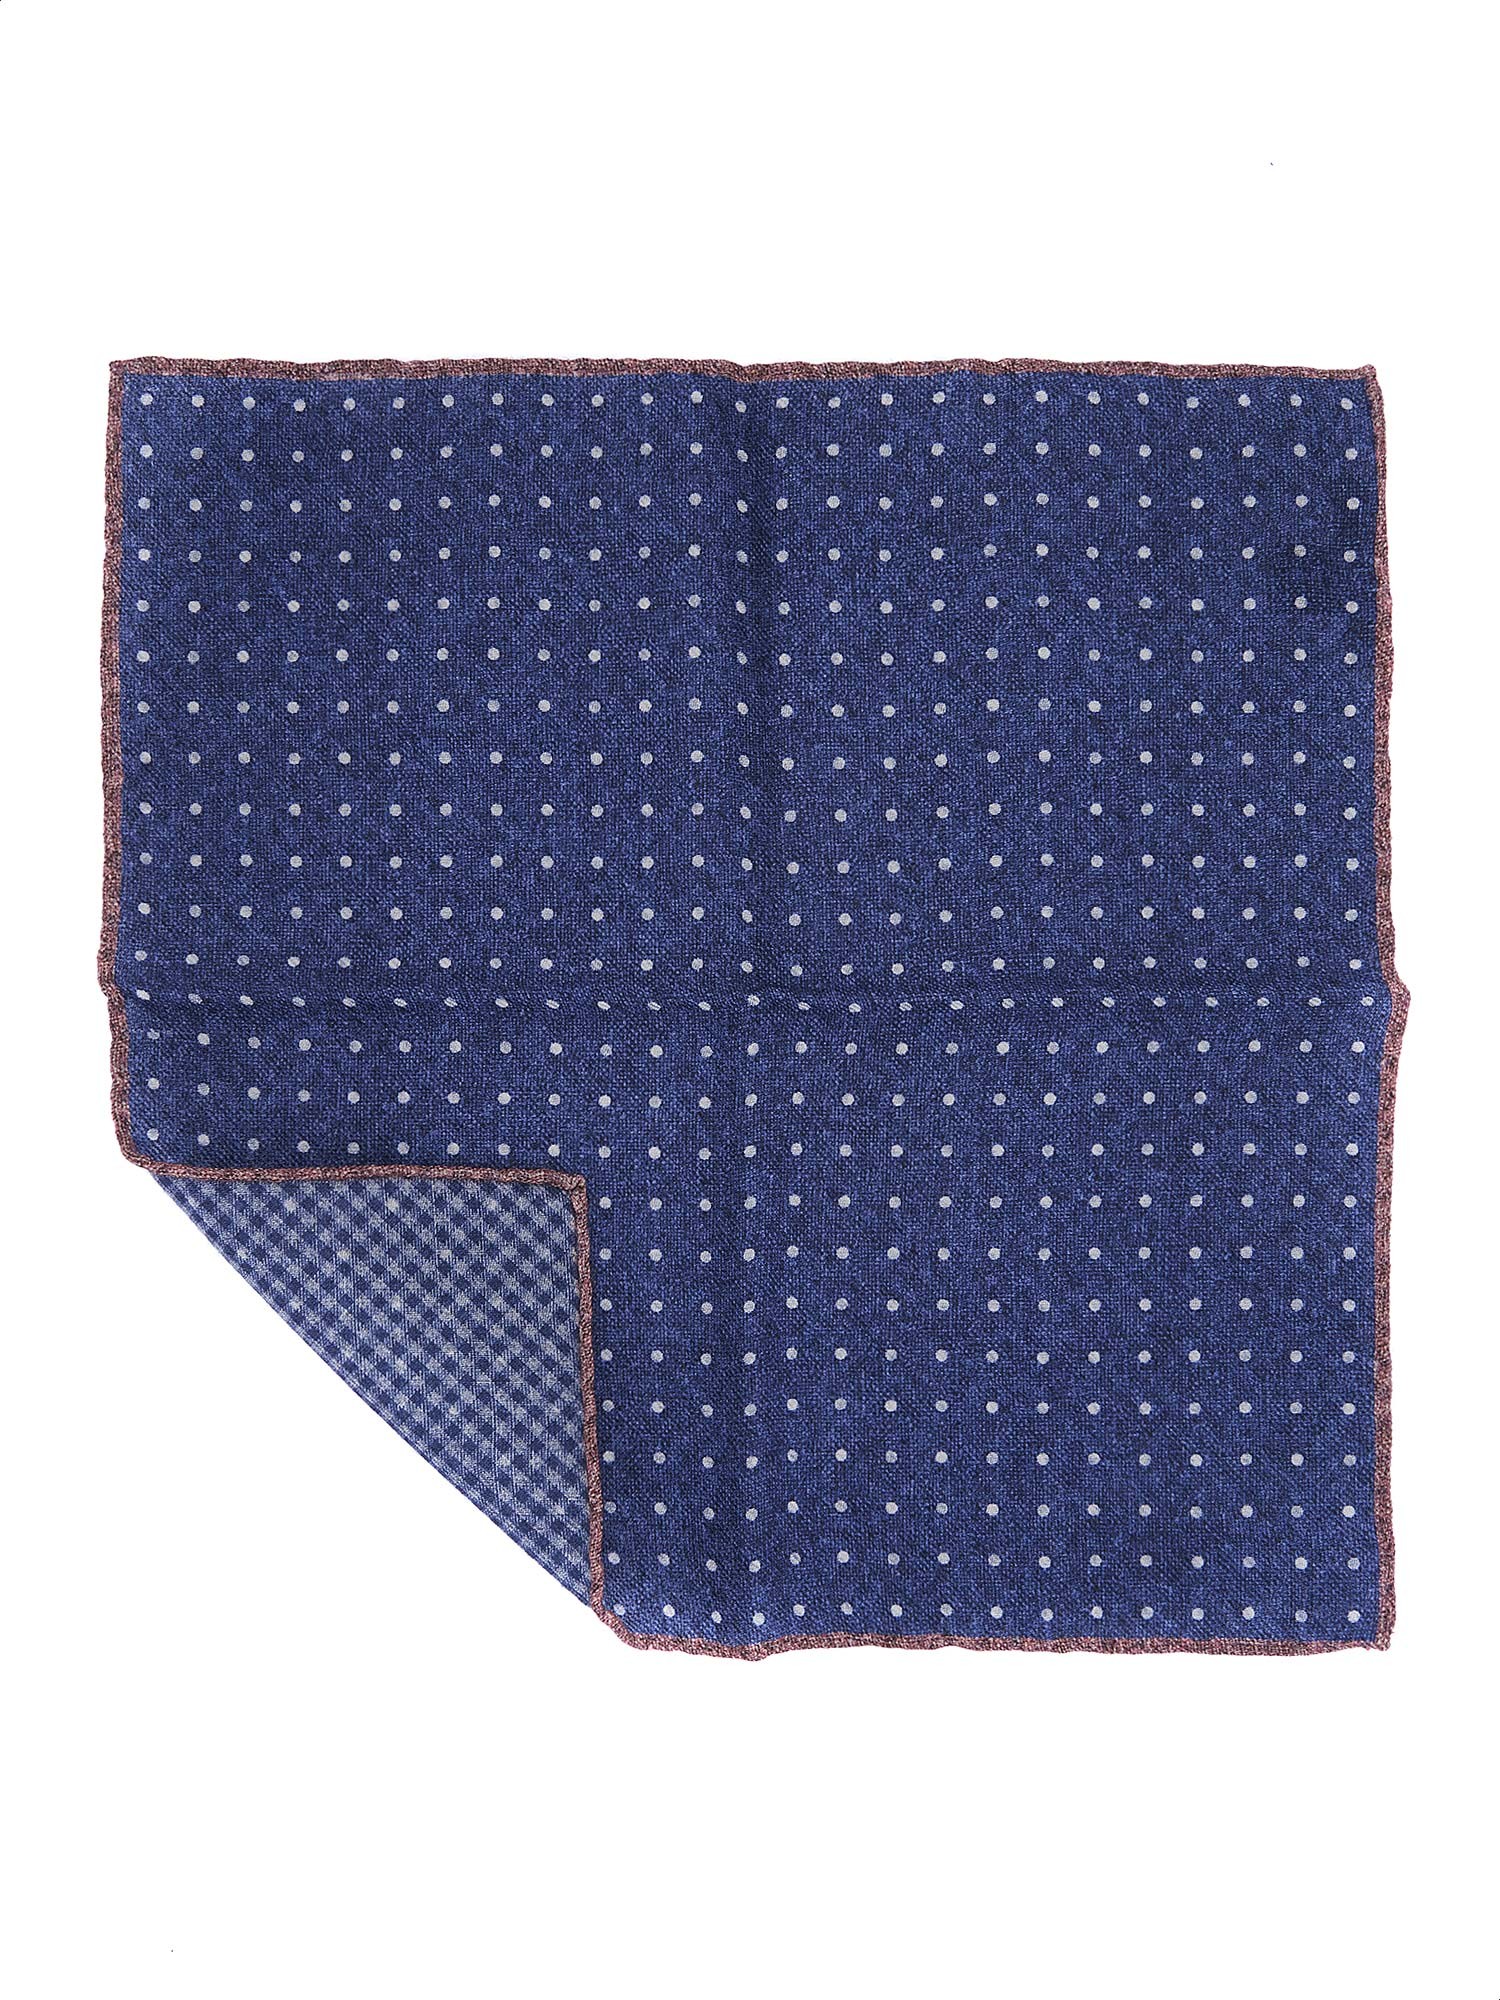 Blue pocket handkerchief with double pattern fots and squares Rosi ...